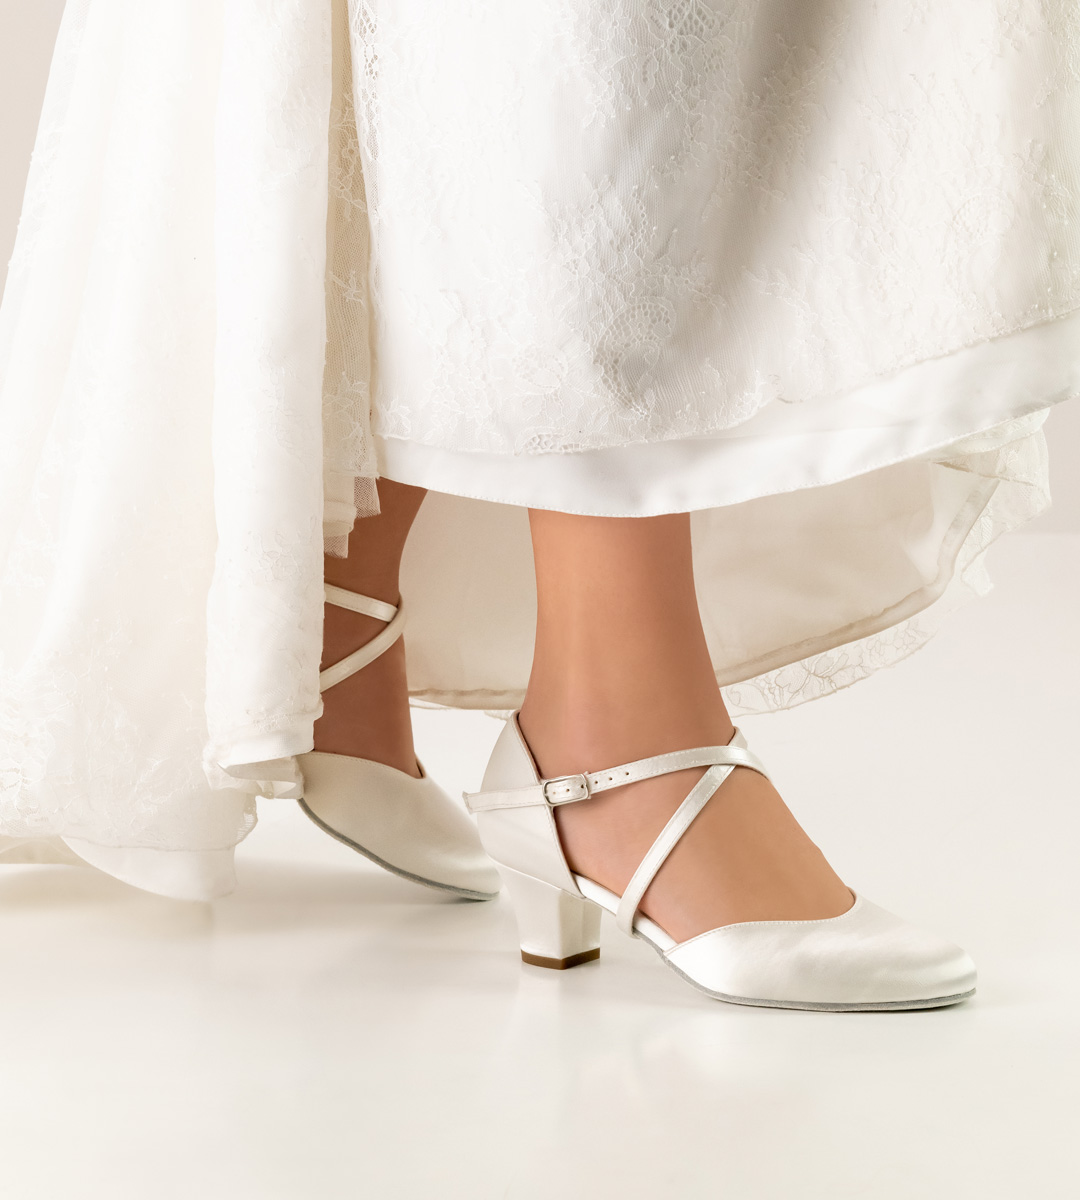 Werner Kern bridal shoe in satin in combination with white wedding dress